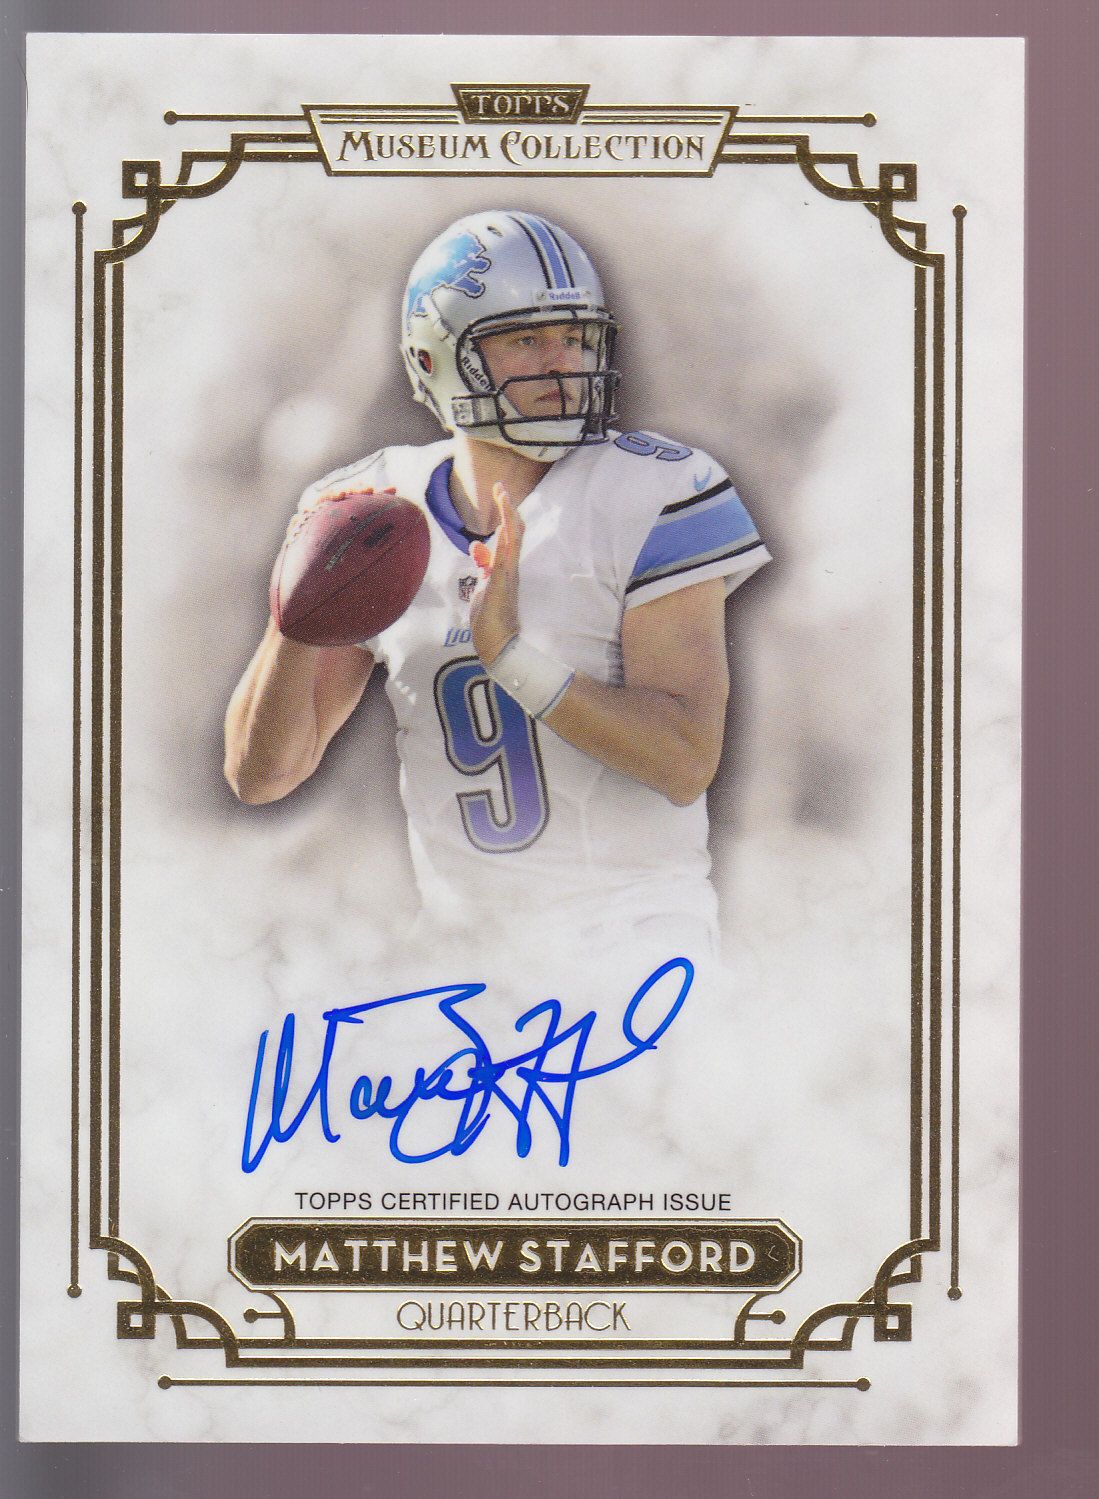 2013 Topps Museum Collection Gold Parallel Autograph Auto Matthew Stafford 25.JPG